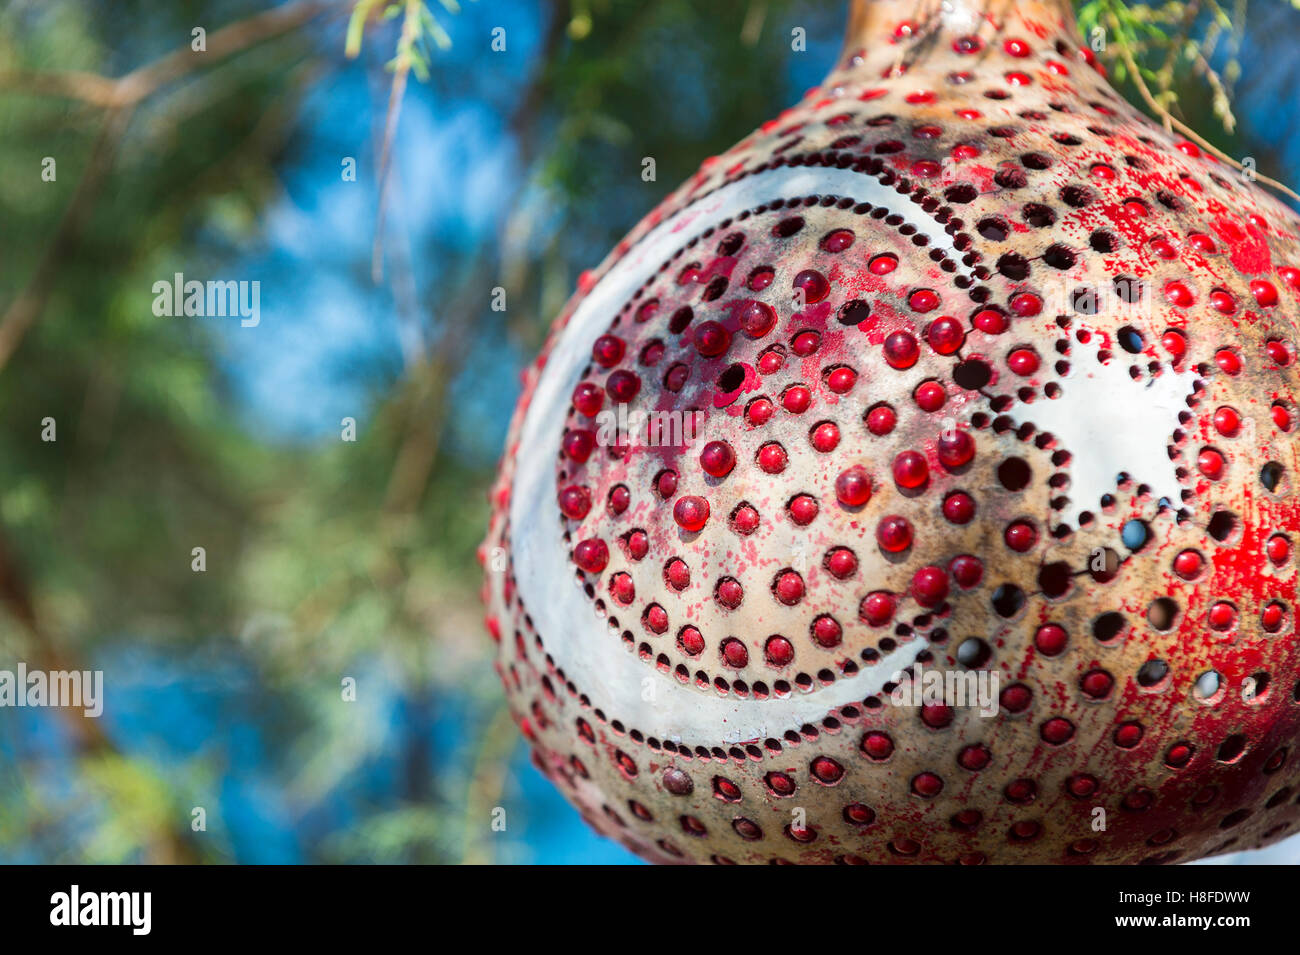 Gourd decorated with the crescent moon and star shape of the Turkish flag hanging from the trees in the resort of Bodrum, Turkey Stock Photo